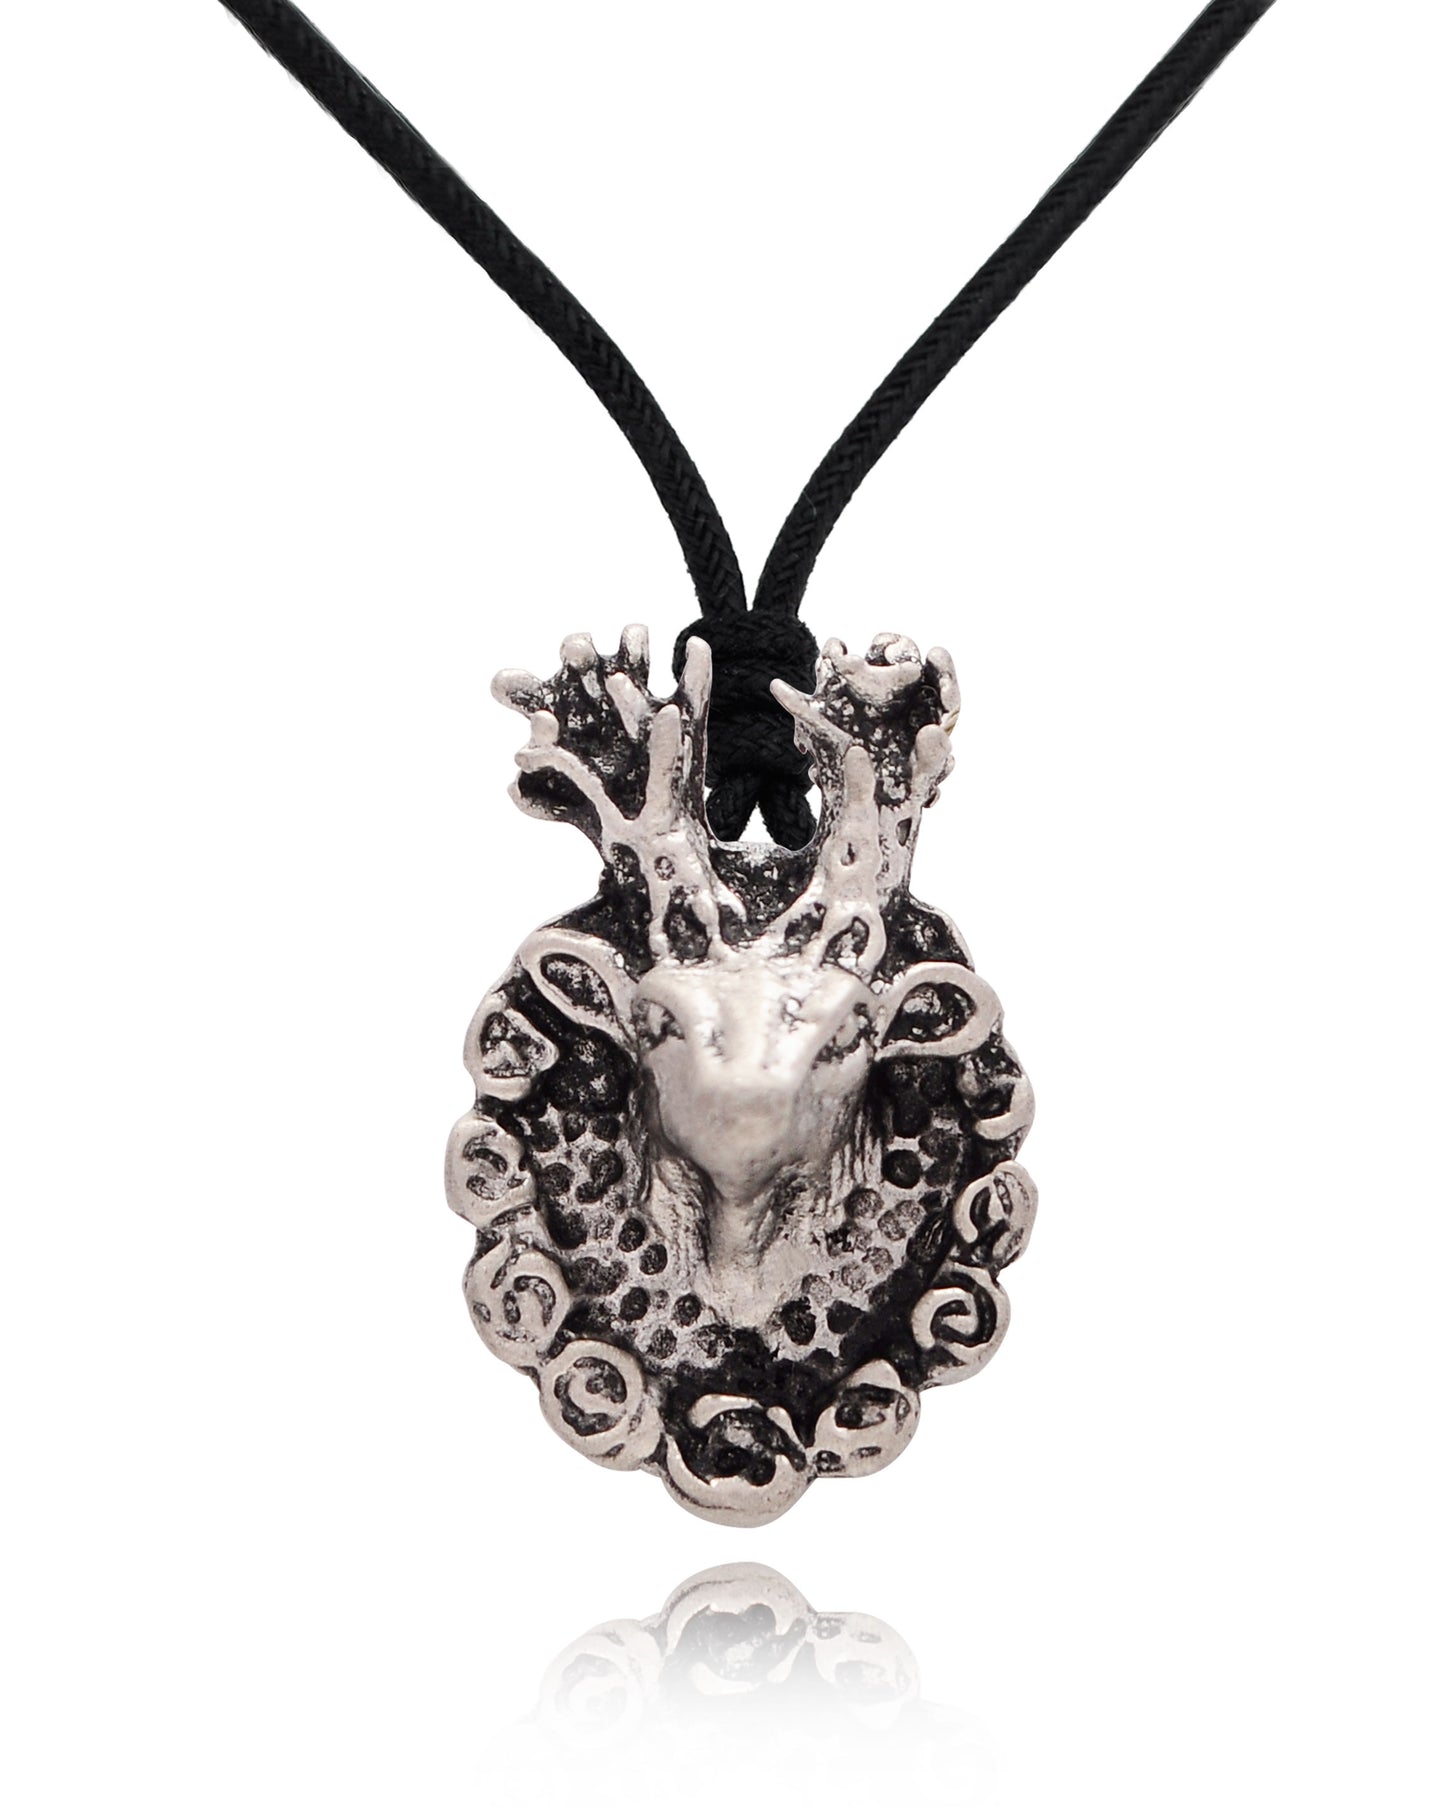 Deer With Round Rose Frame Silver Pewter Charm Necklace Pendant Jewelry With Cotton Cord